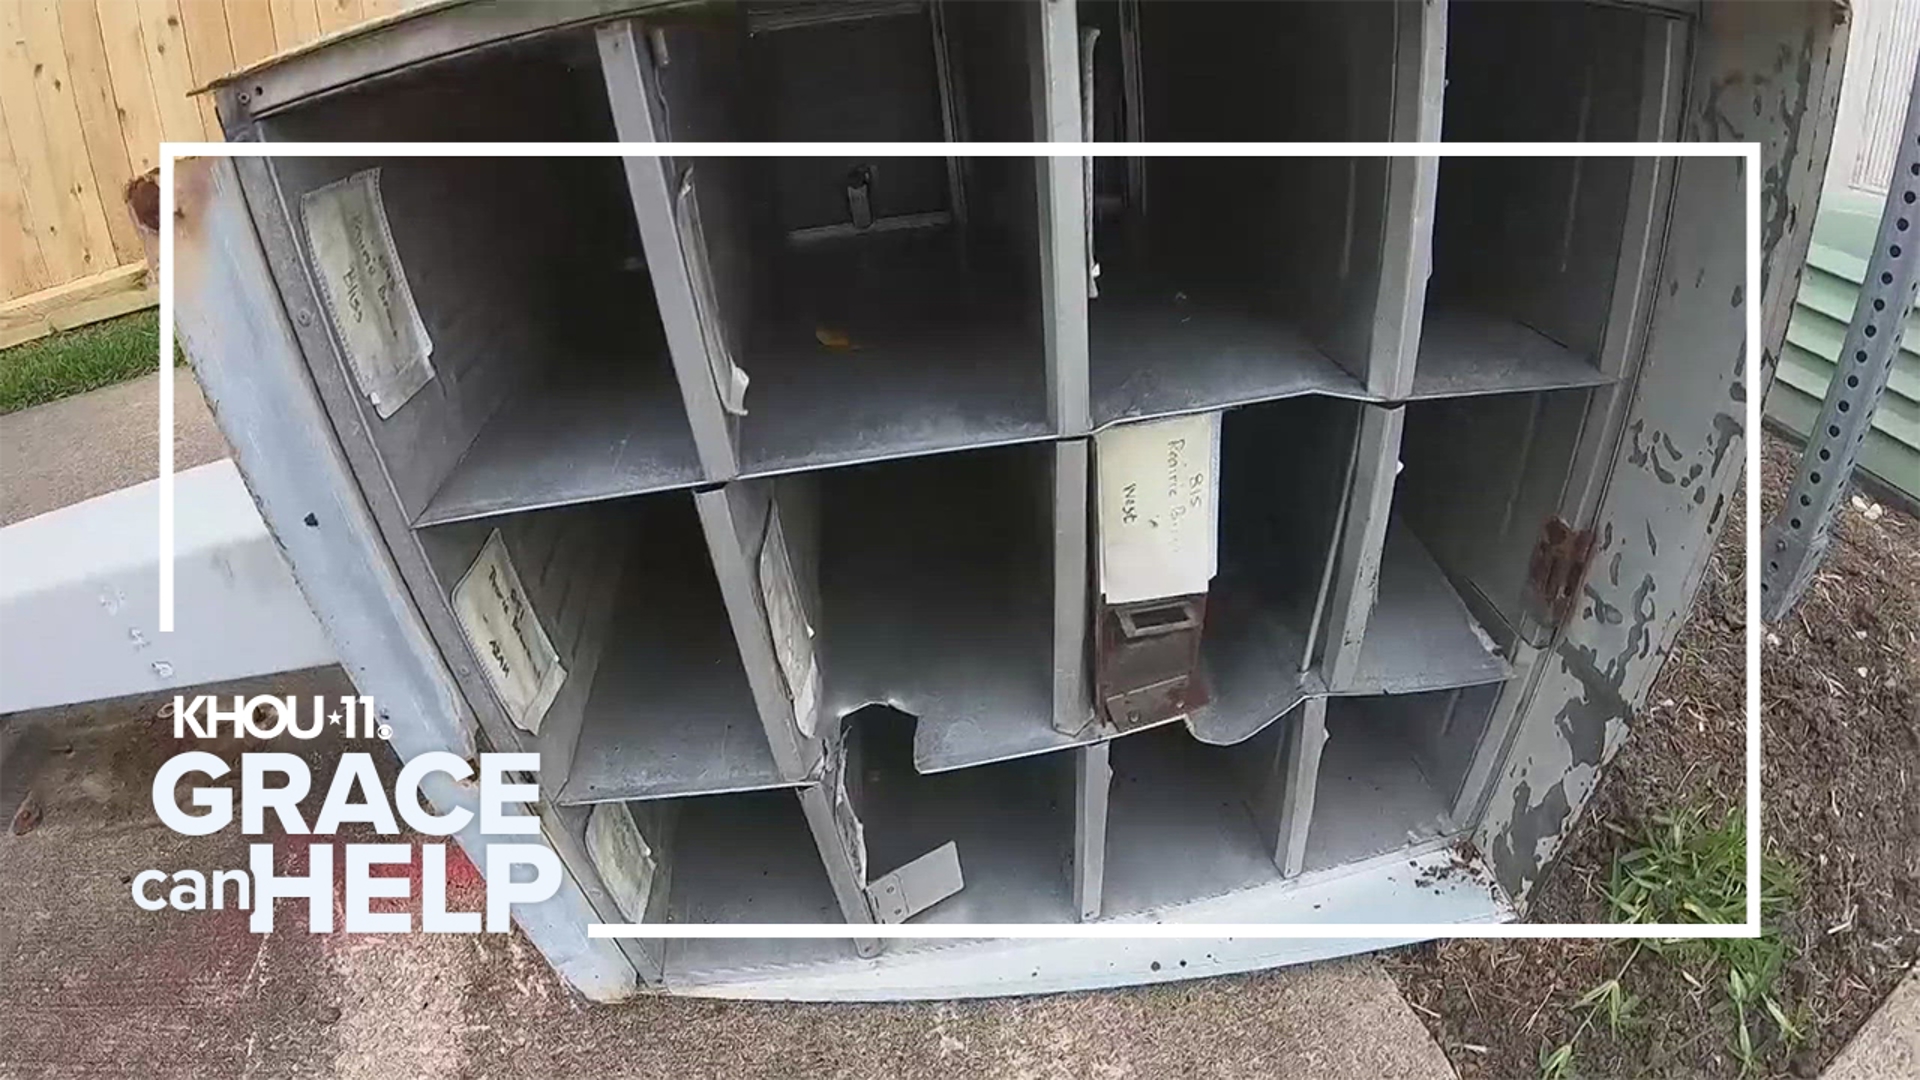 A resident told KHOU 11 News the cluster box units in the Bay Knoll subdivision of Clear Lake were broken into three months ago and still haven't been fixed.